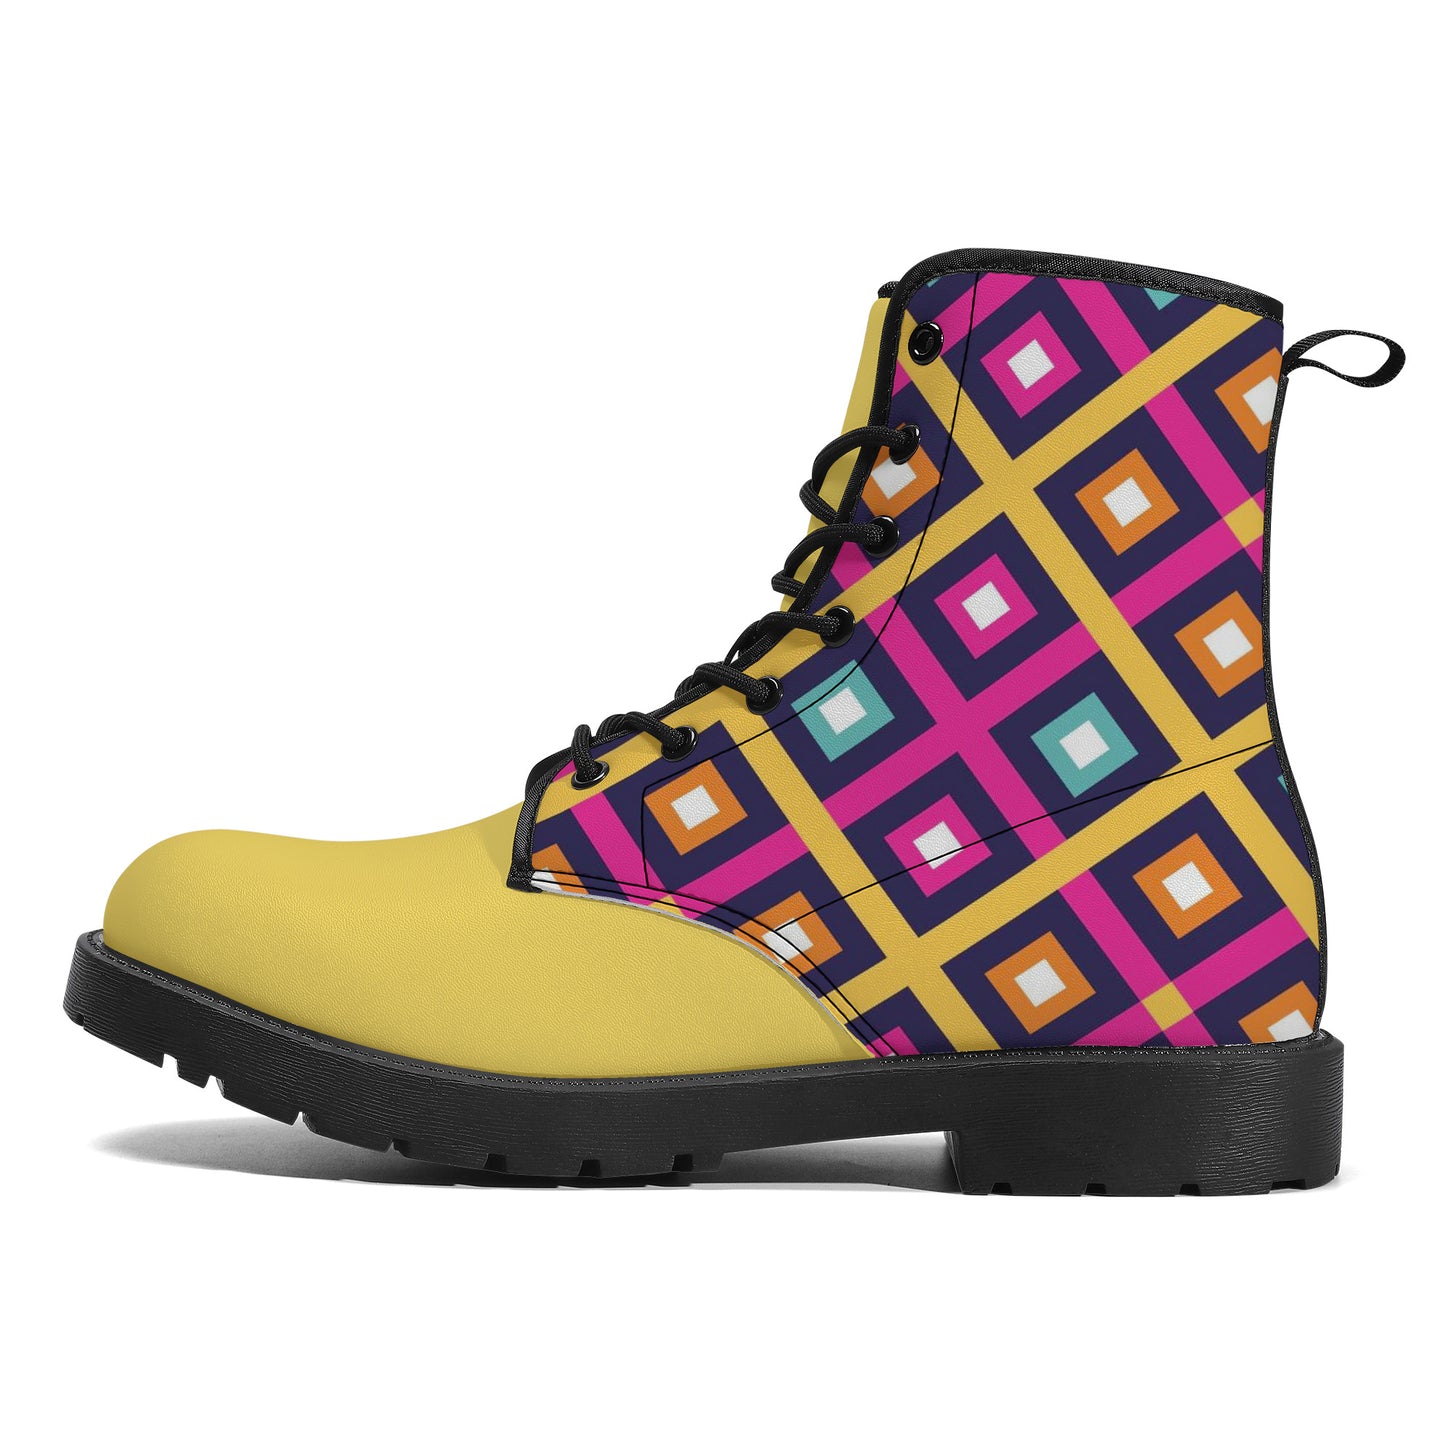 Unisex Synthetic Leather Boots - Geometric